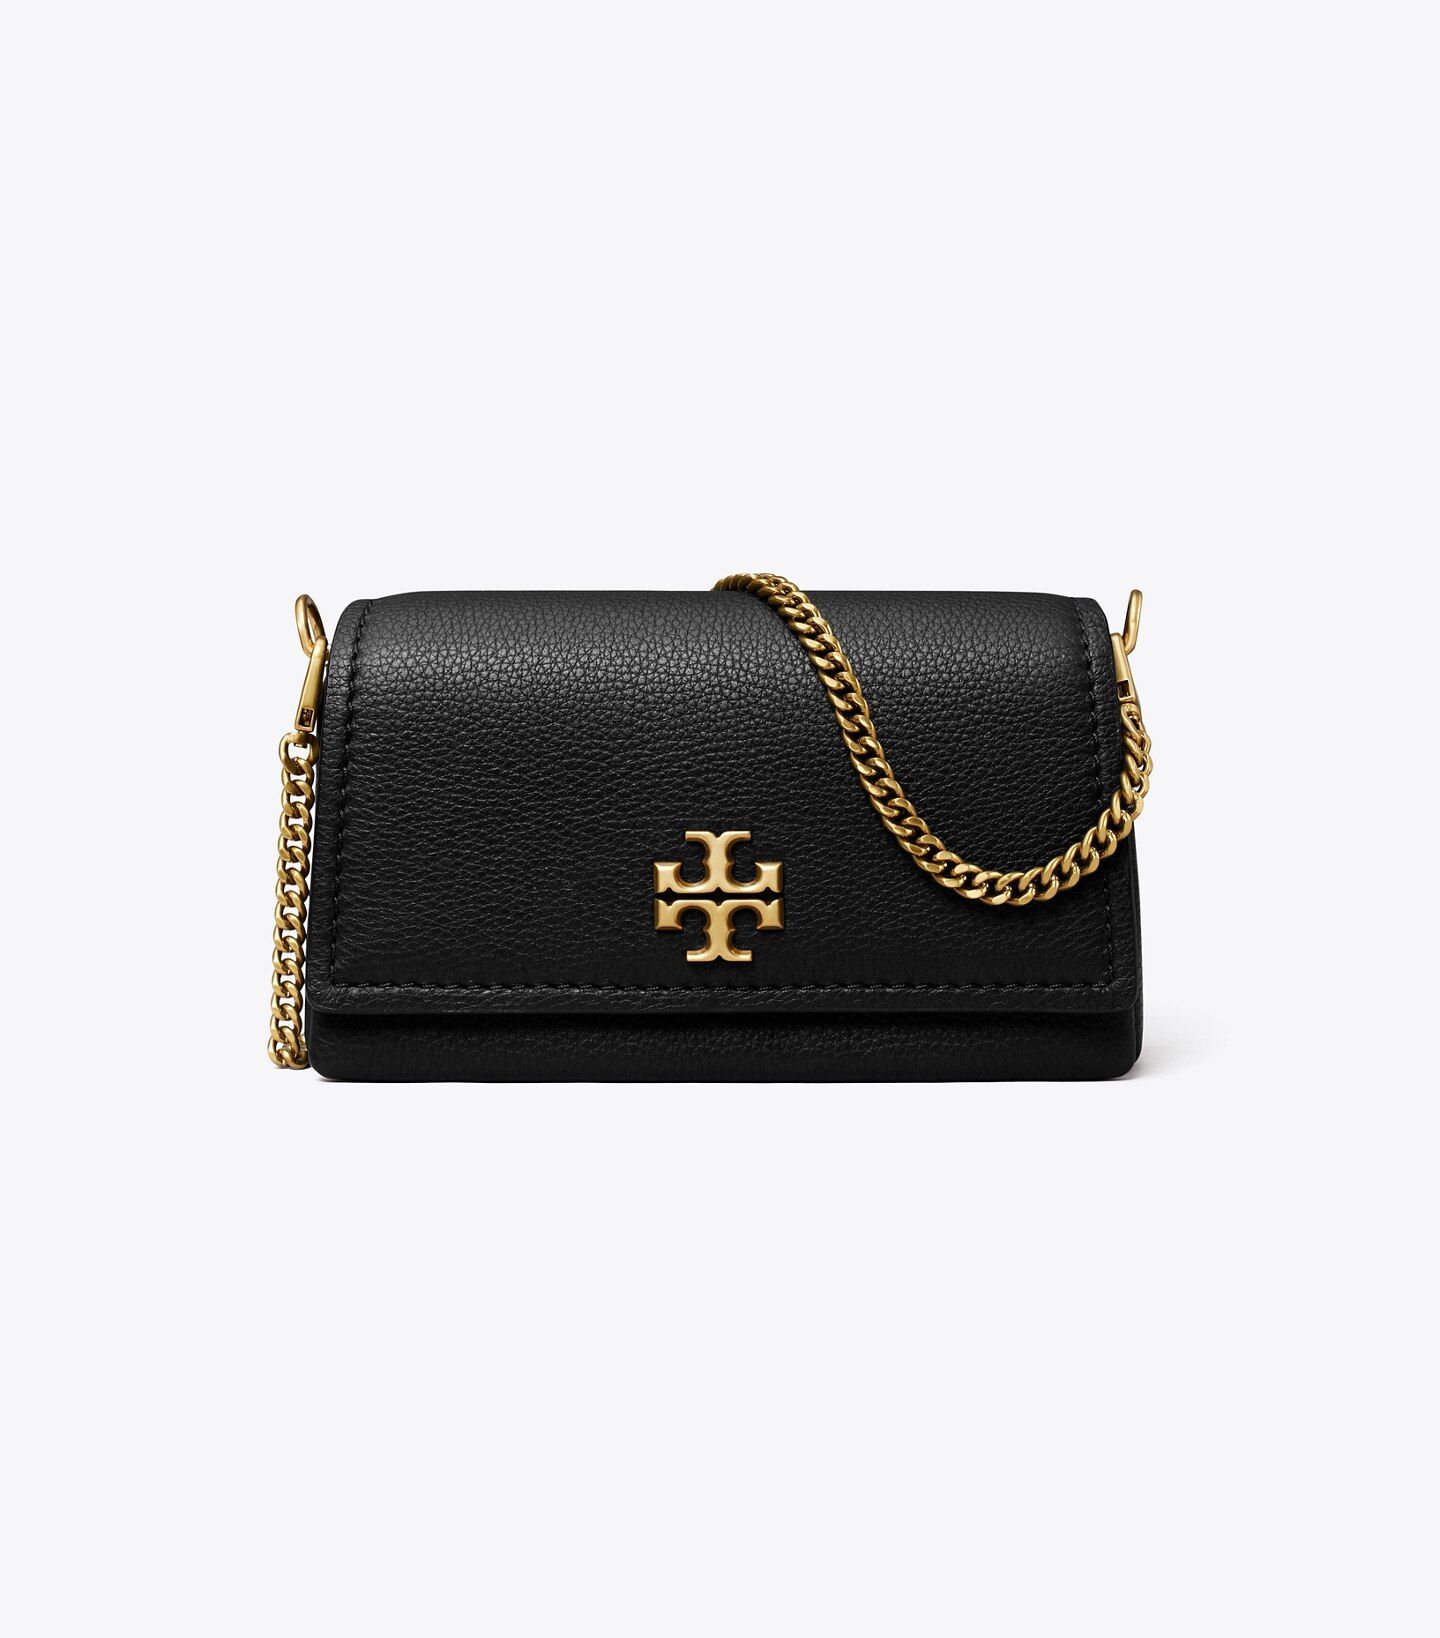 Session is about to end29:59Continue to save your informationContinue | Tory Burch (US)